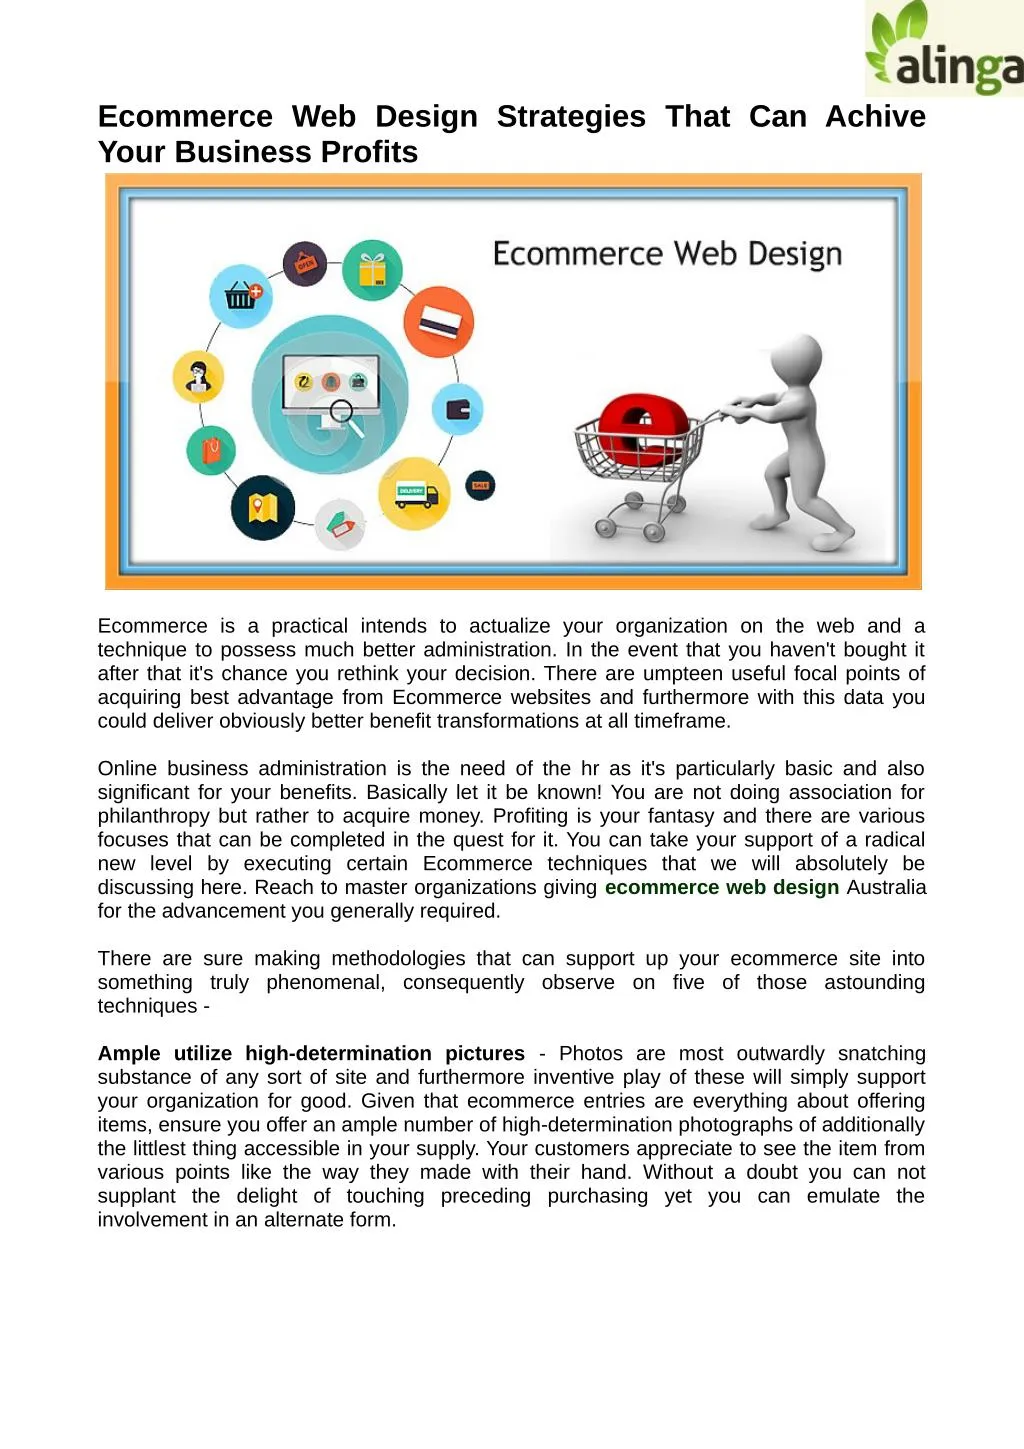 ecommerce web design strategies that can achive